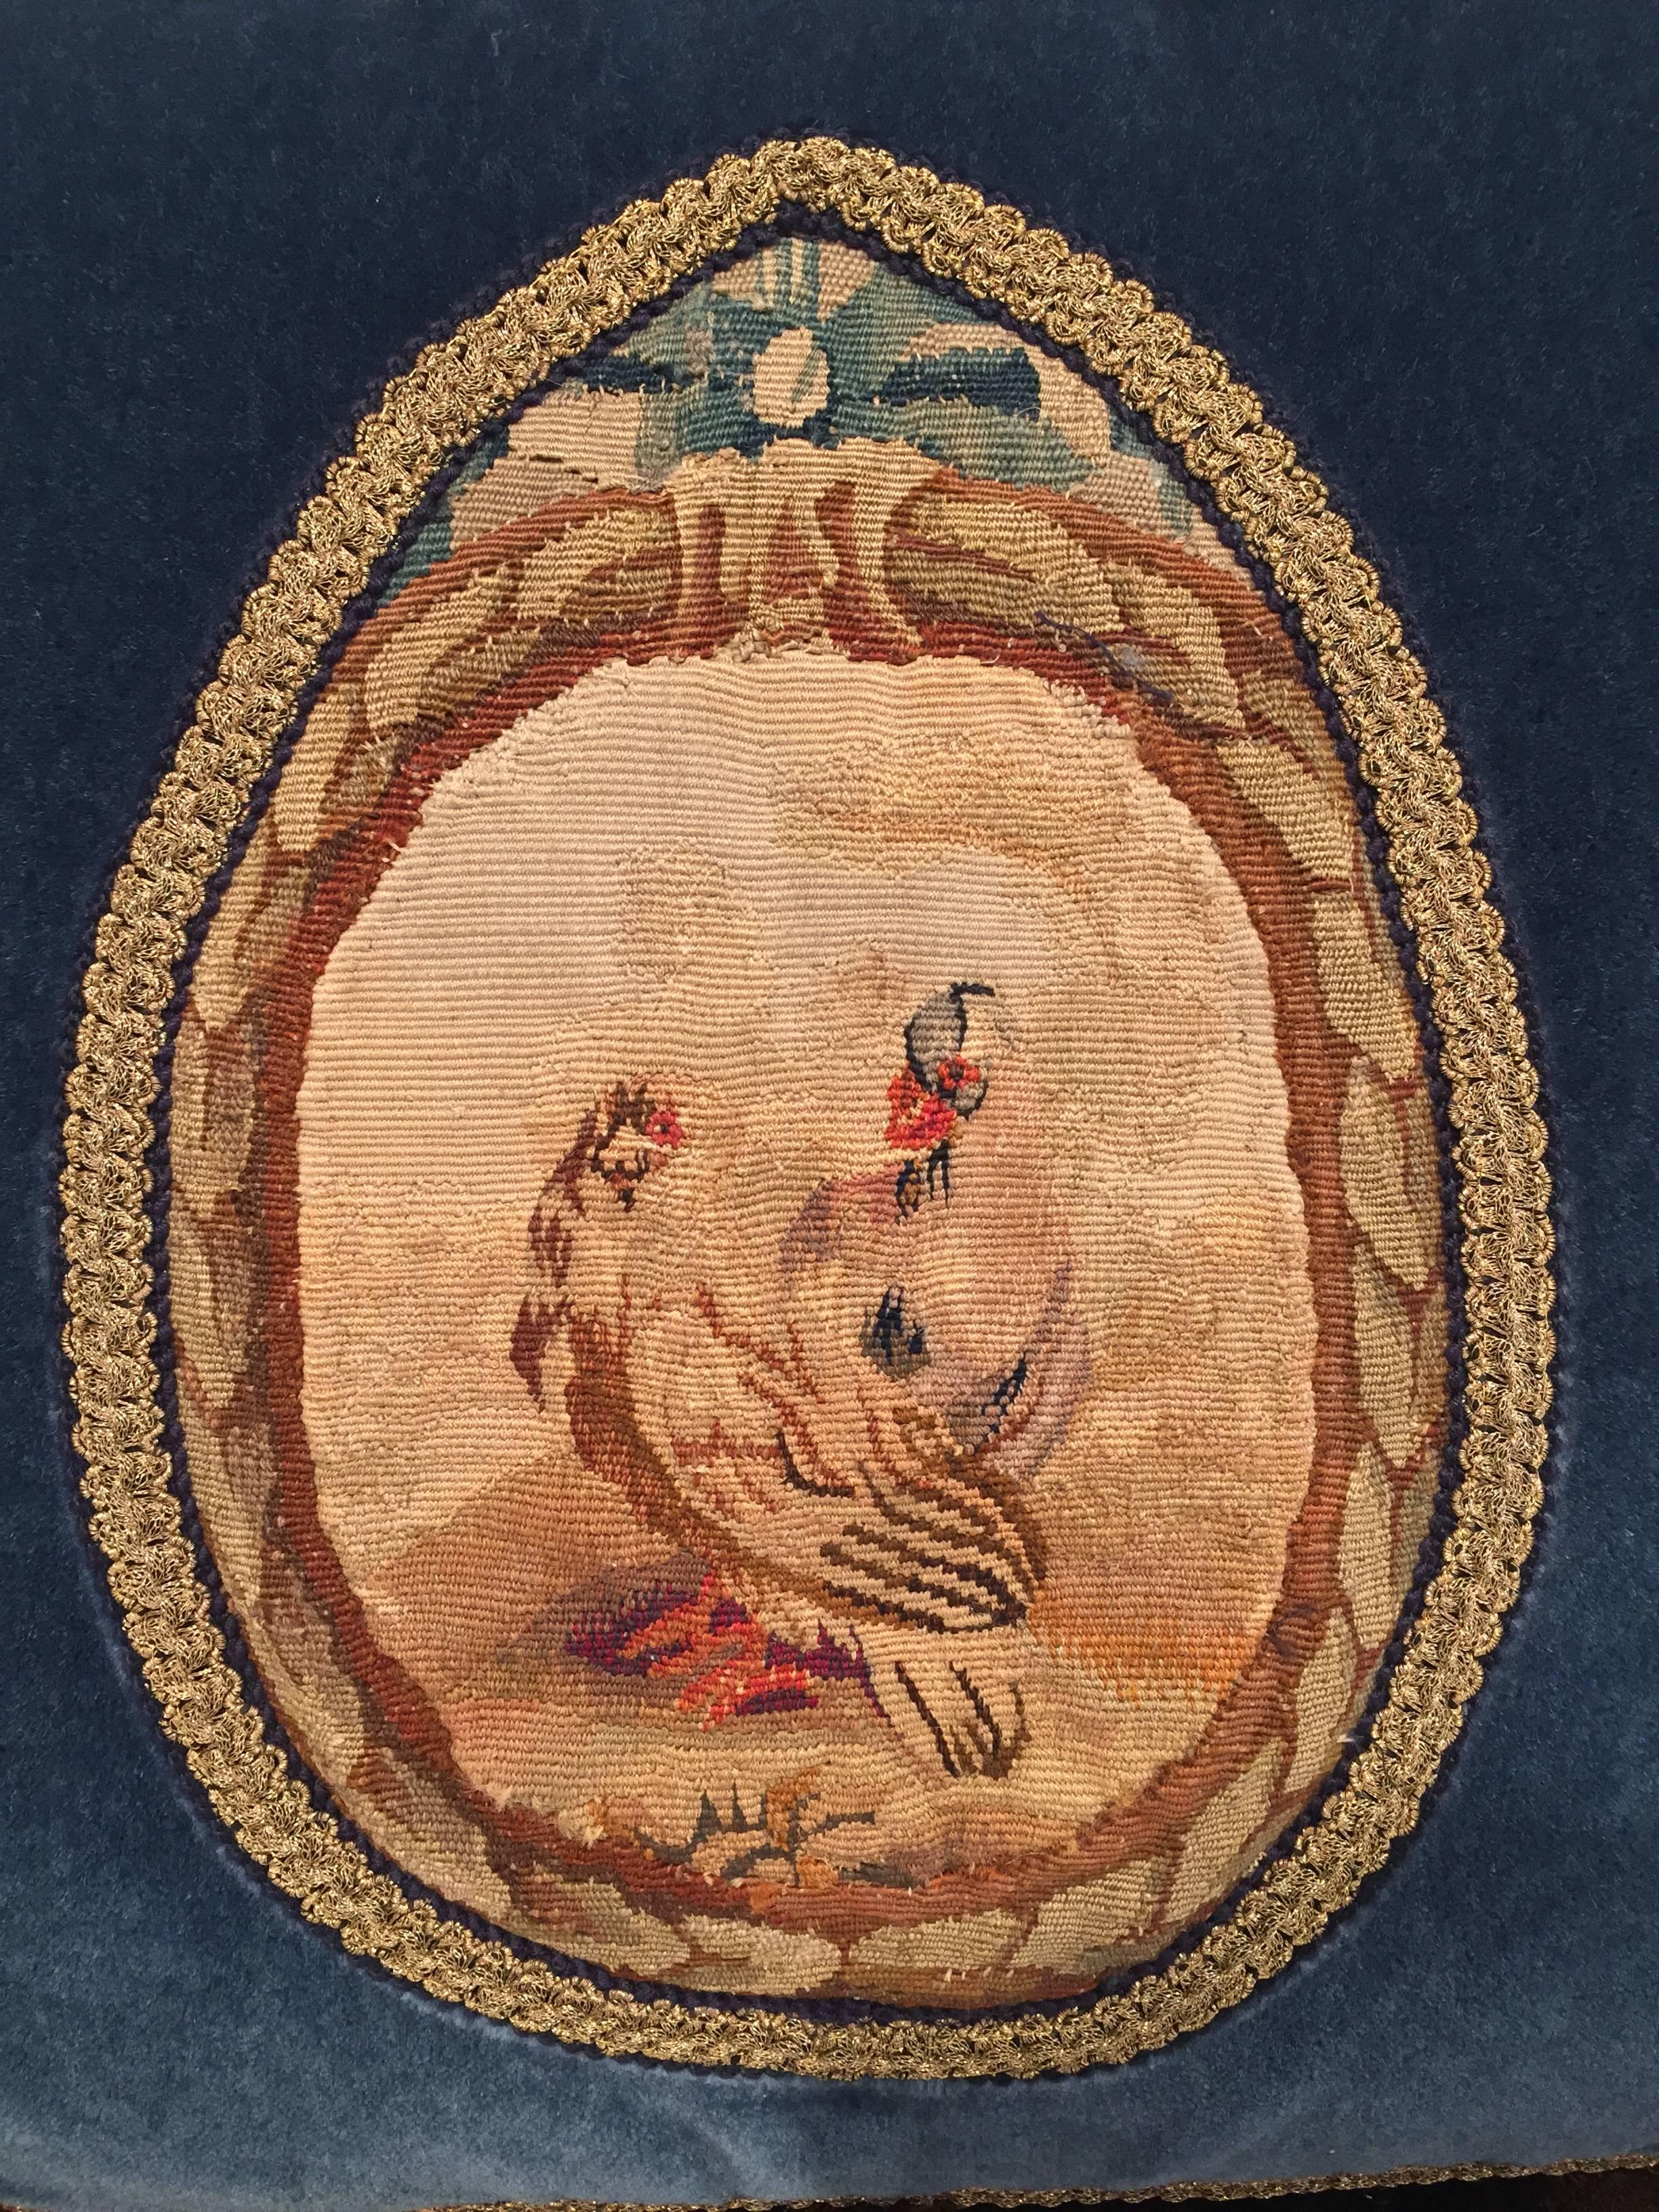 Decorate a bed or living room couch with this custom, blue velvet pillow. The square, plush pillow is made from scratch using an antique Aubusson tapestry medallion. The pillow design features a pair a chickens, and trims and tassels. The tapestry